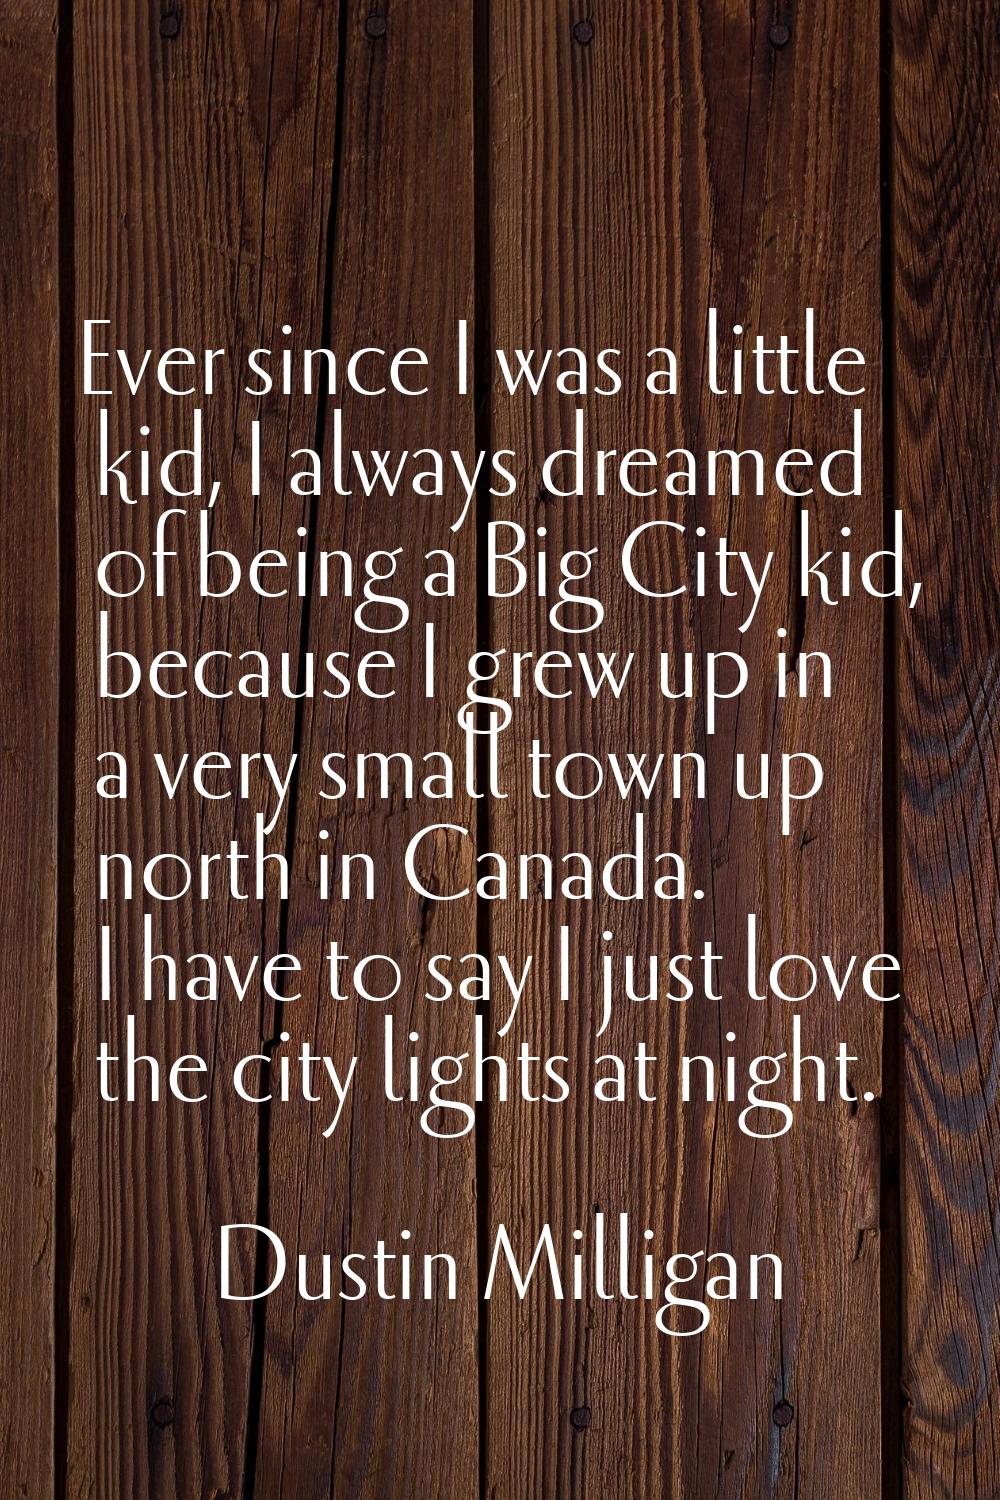 Ever since I was a little kid, I always dreamed of being a Big City kid, because I grew up in a ver